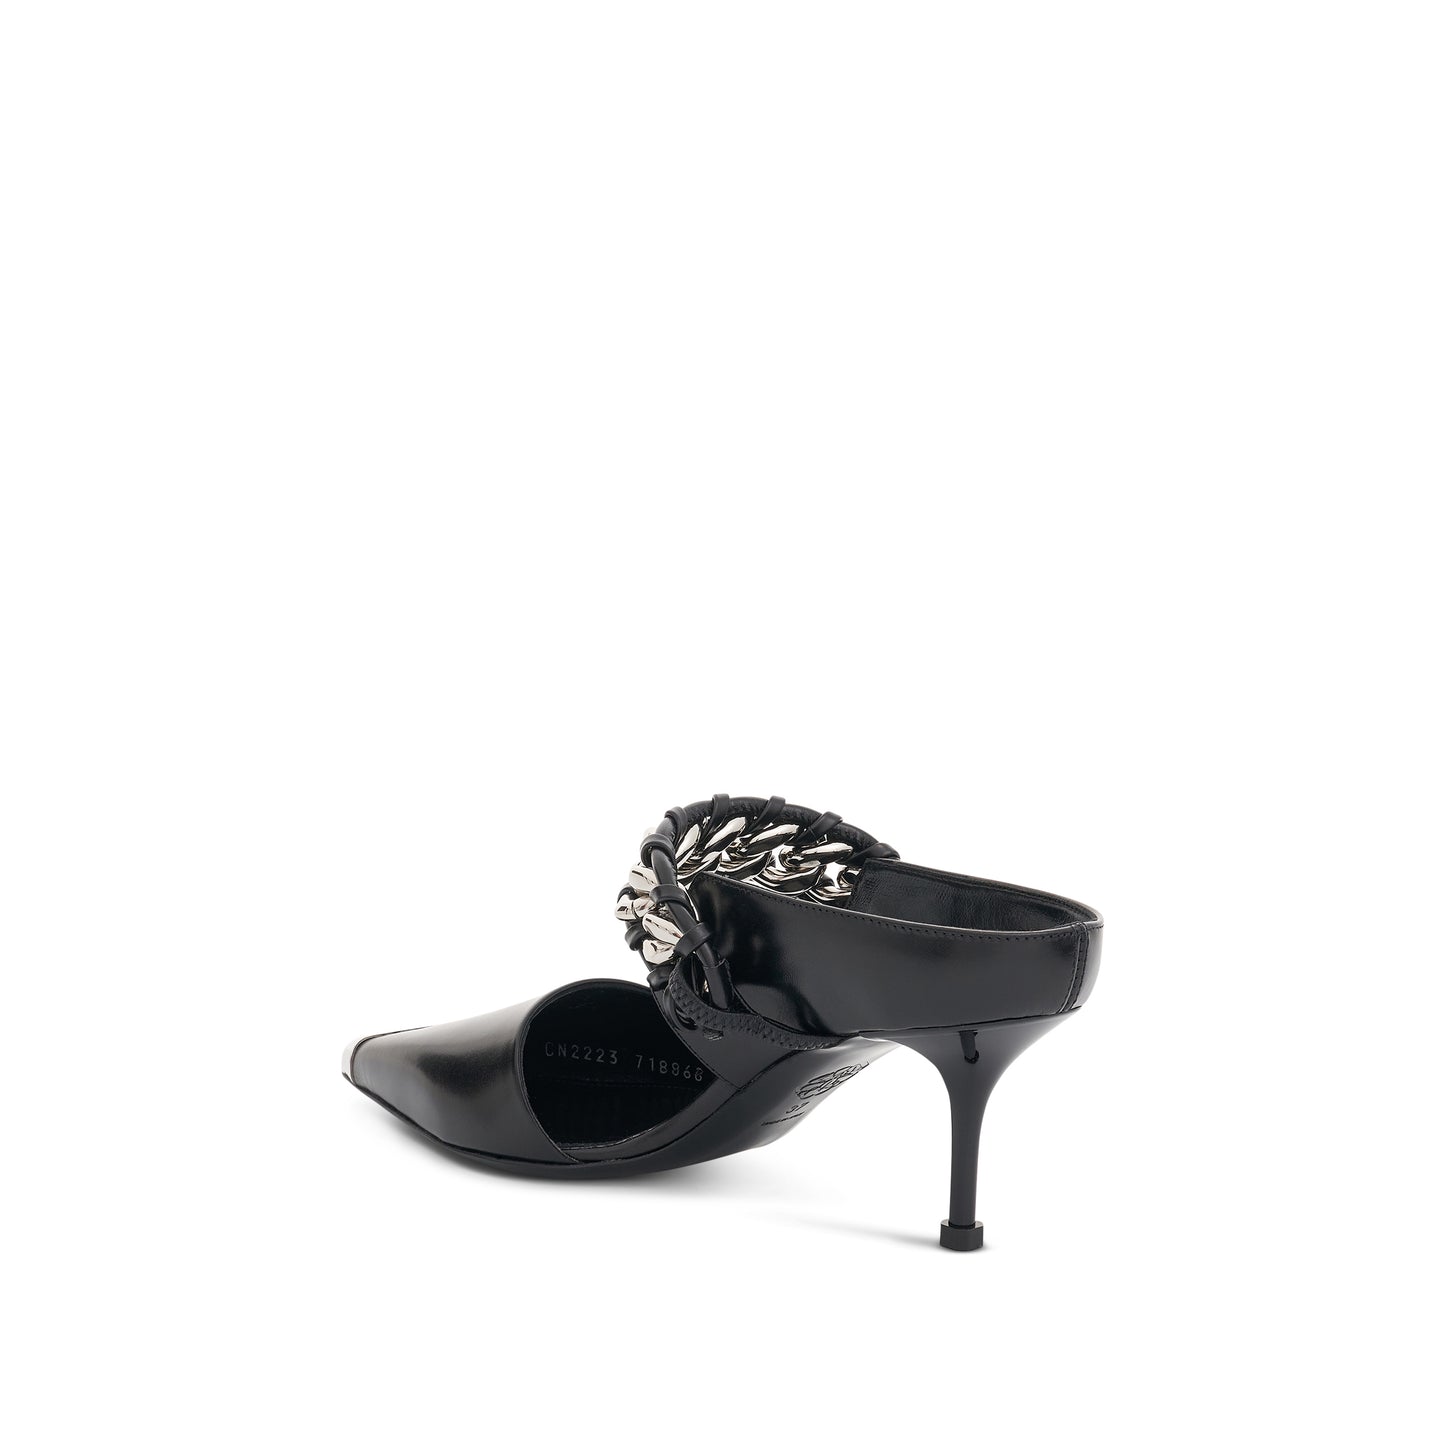 Chain Link Leather Pumps in Black/Silver